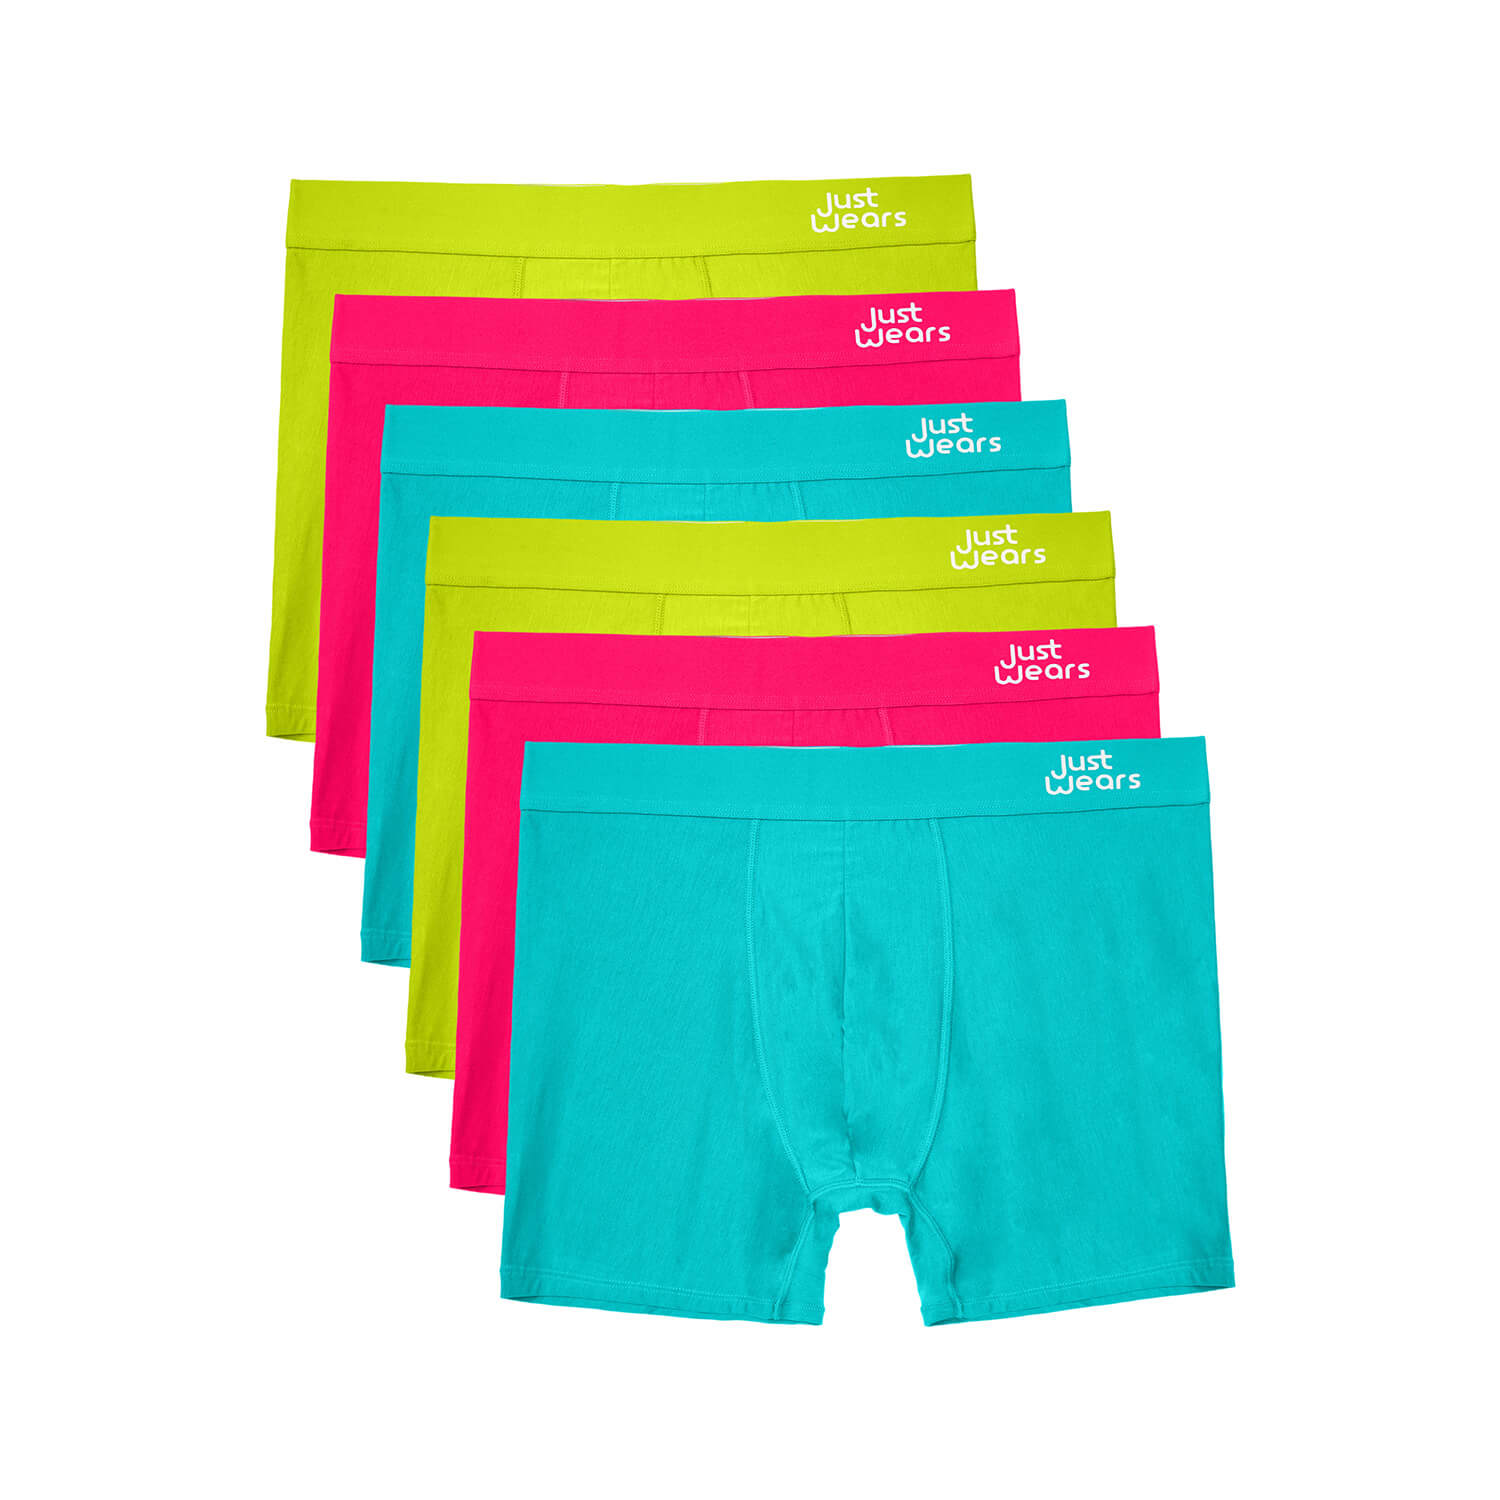 Men’s Blue / Green / Pink Super Soft Boxer Briefs With Pouch - Anti-Chafe & No Ride Up Design - Six Pack - Neon Green, Pink, Blue Medium Justwears